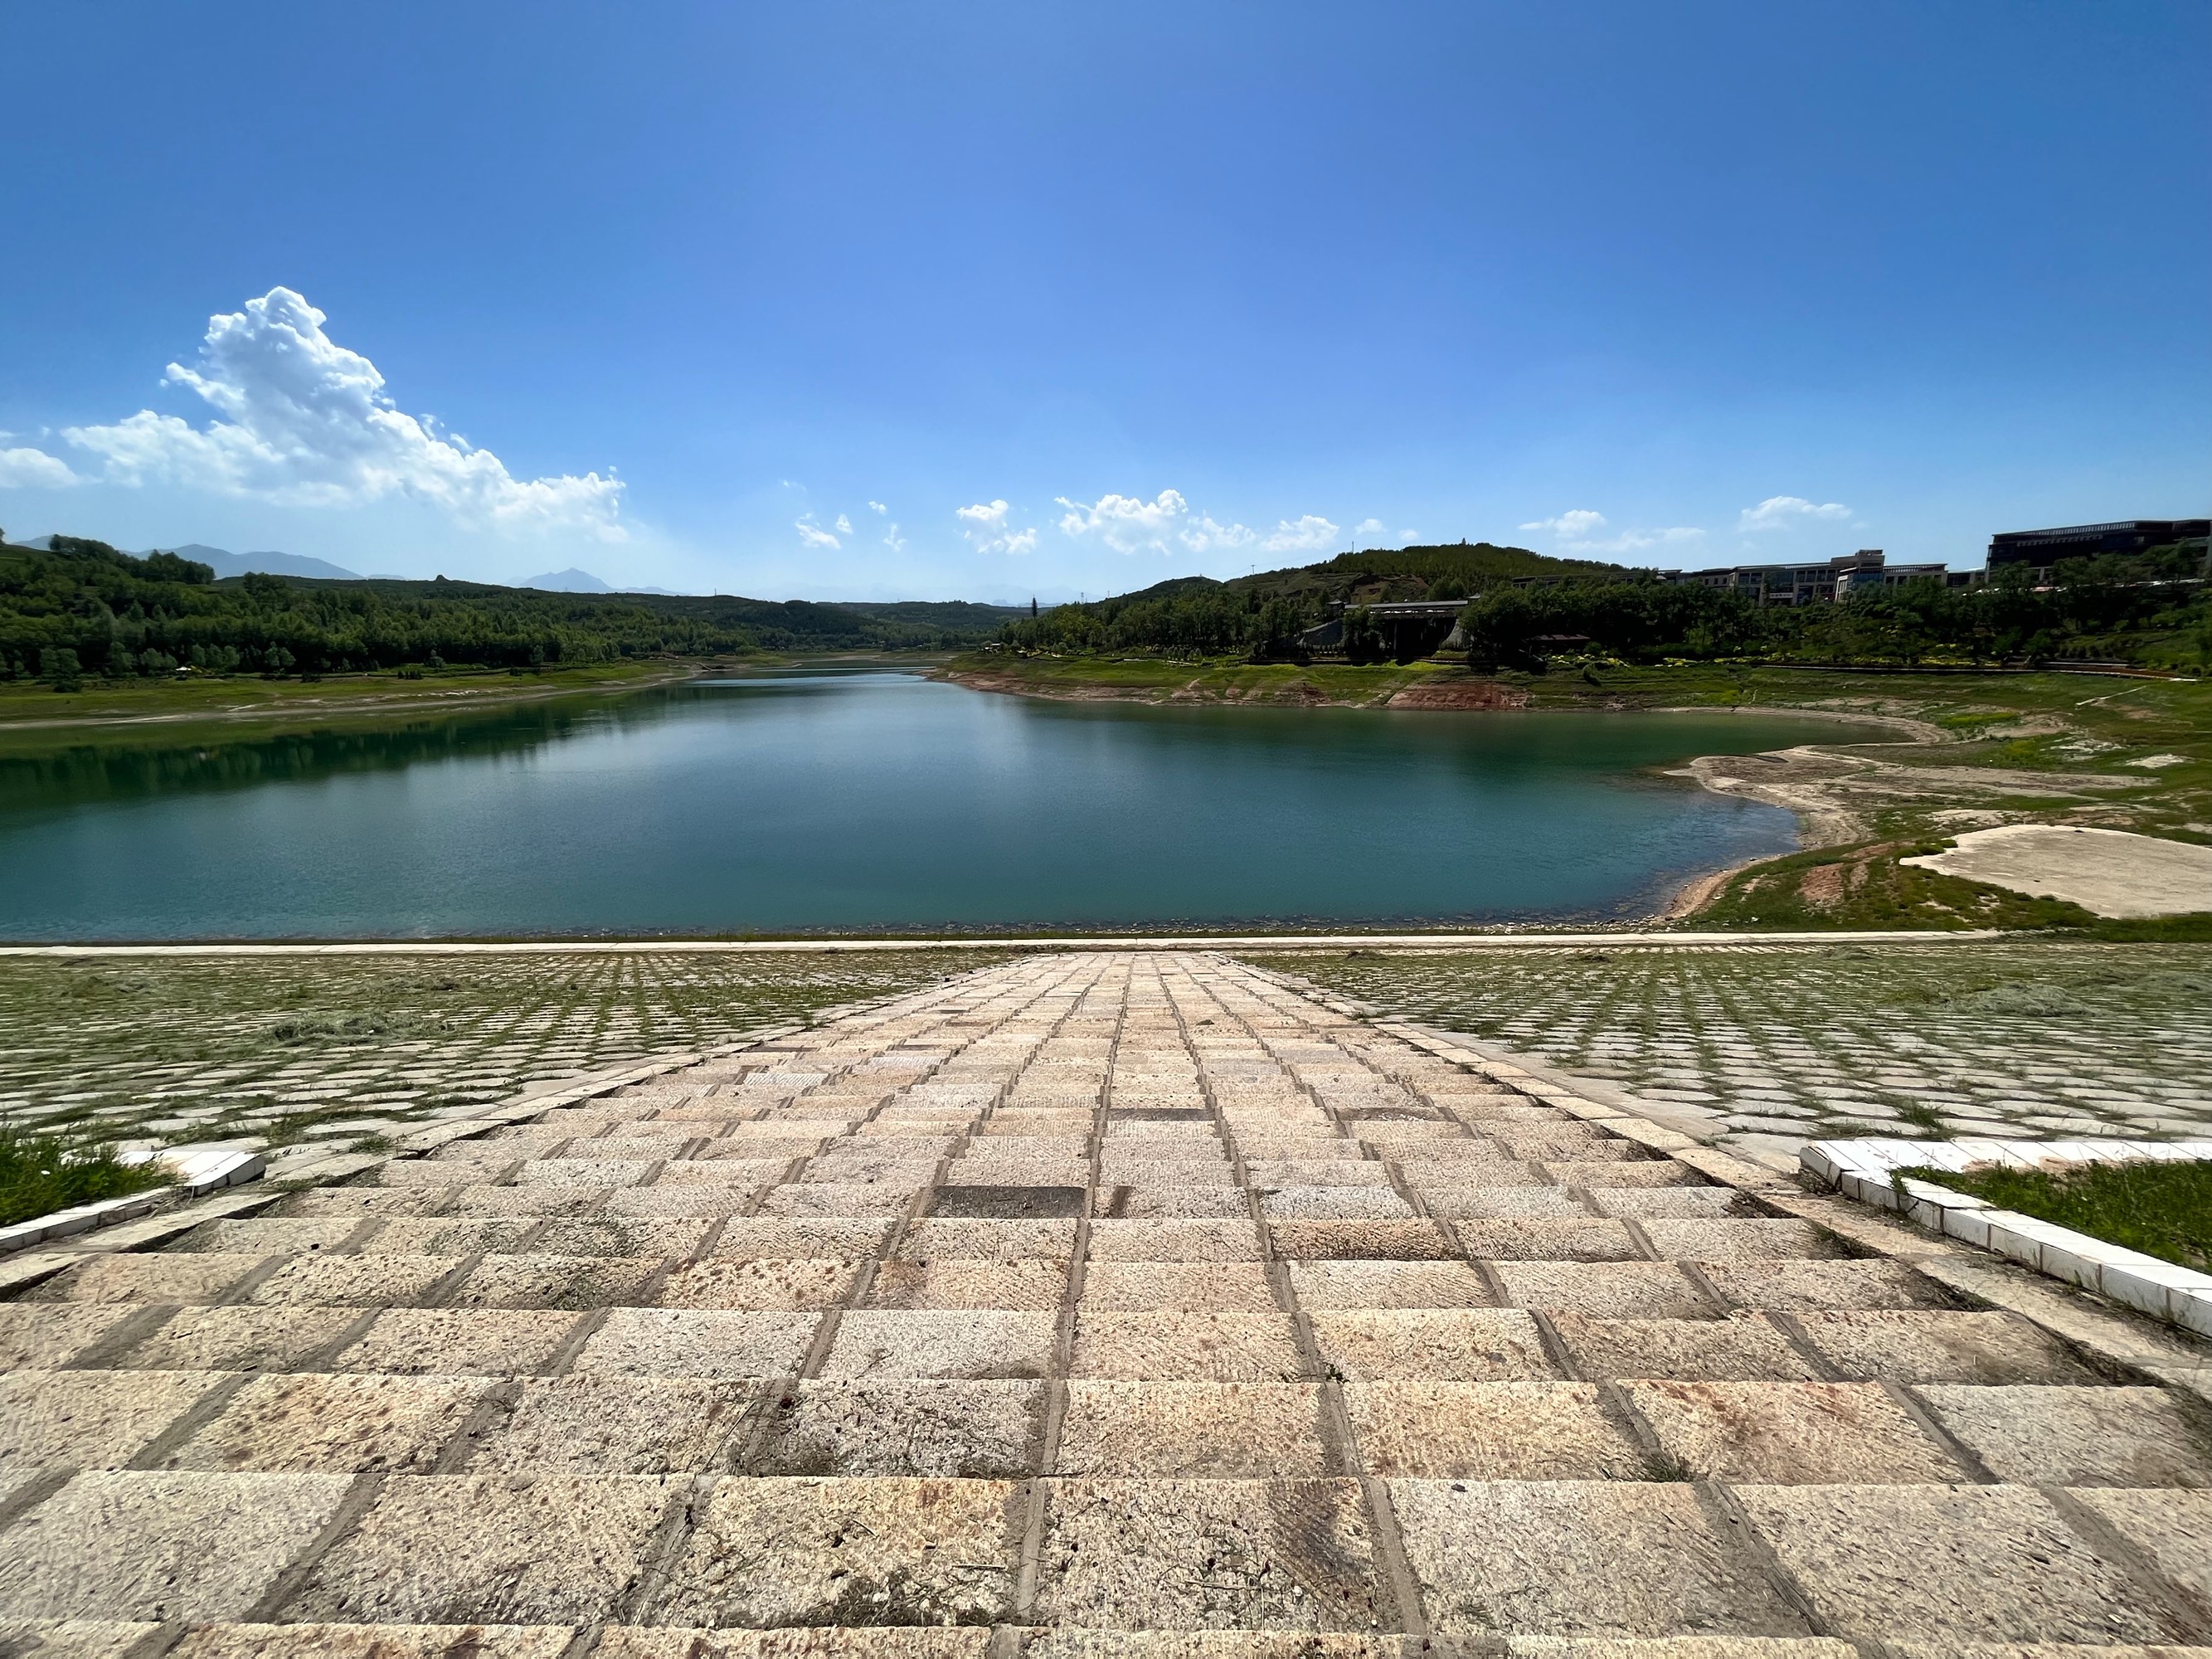 The dam and lake of Lianhu Reservoir